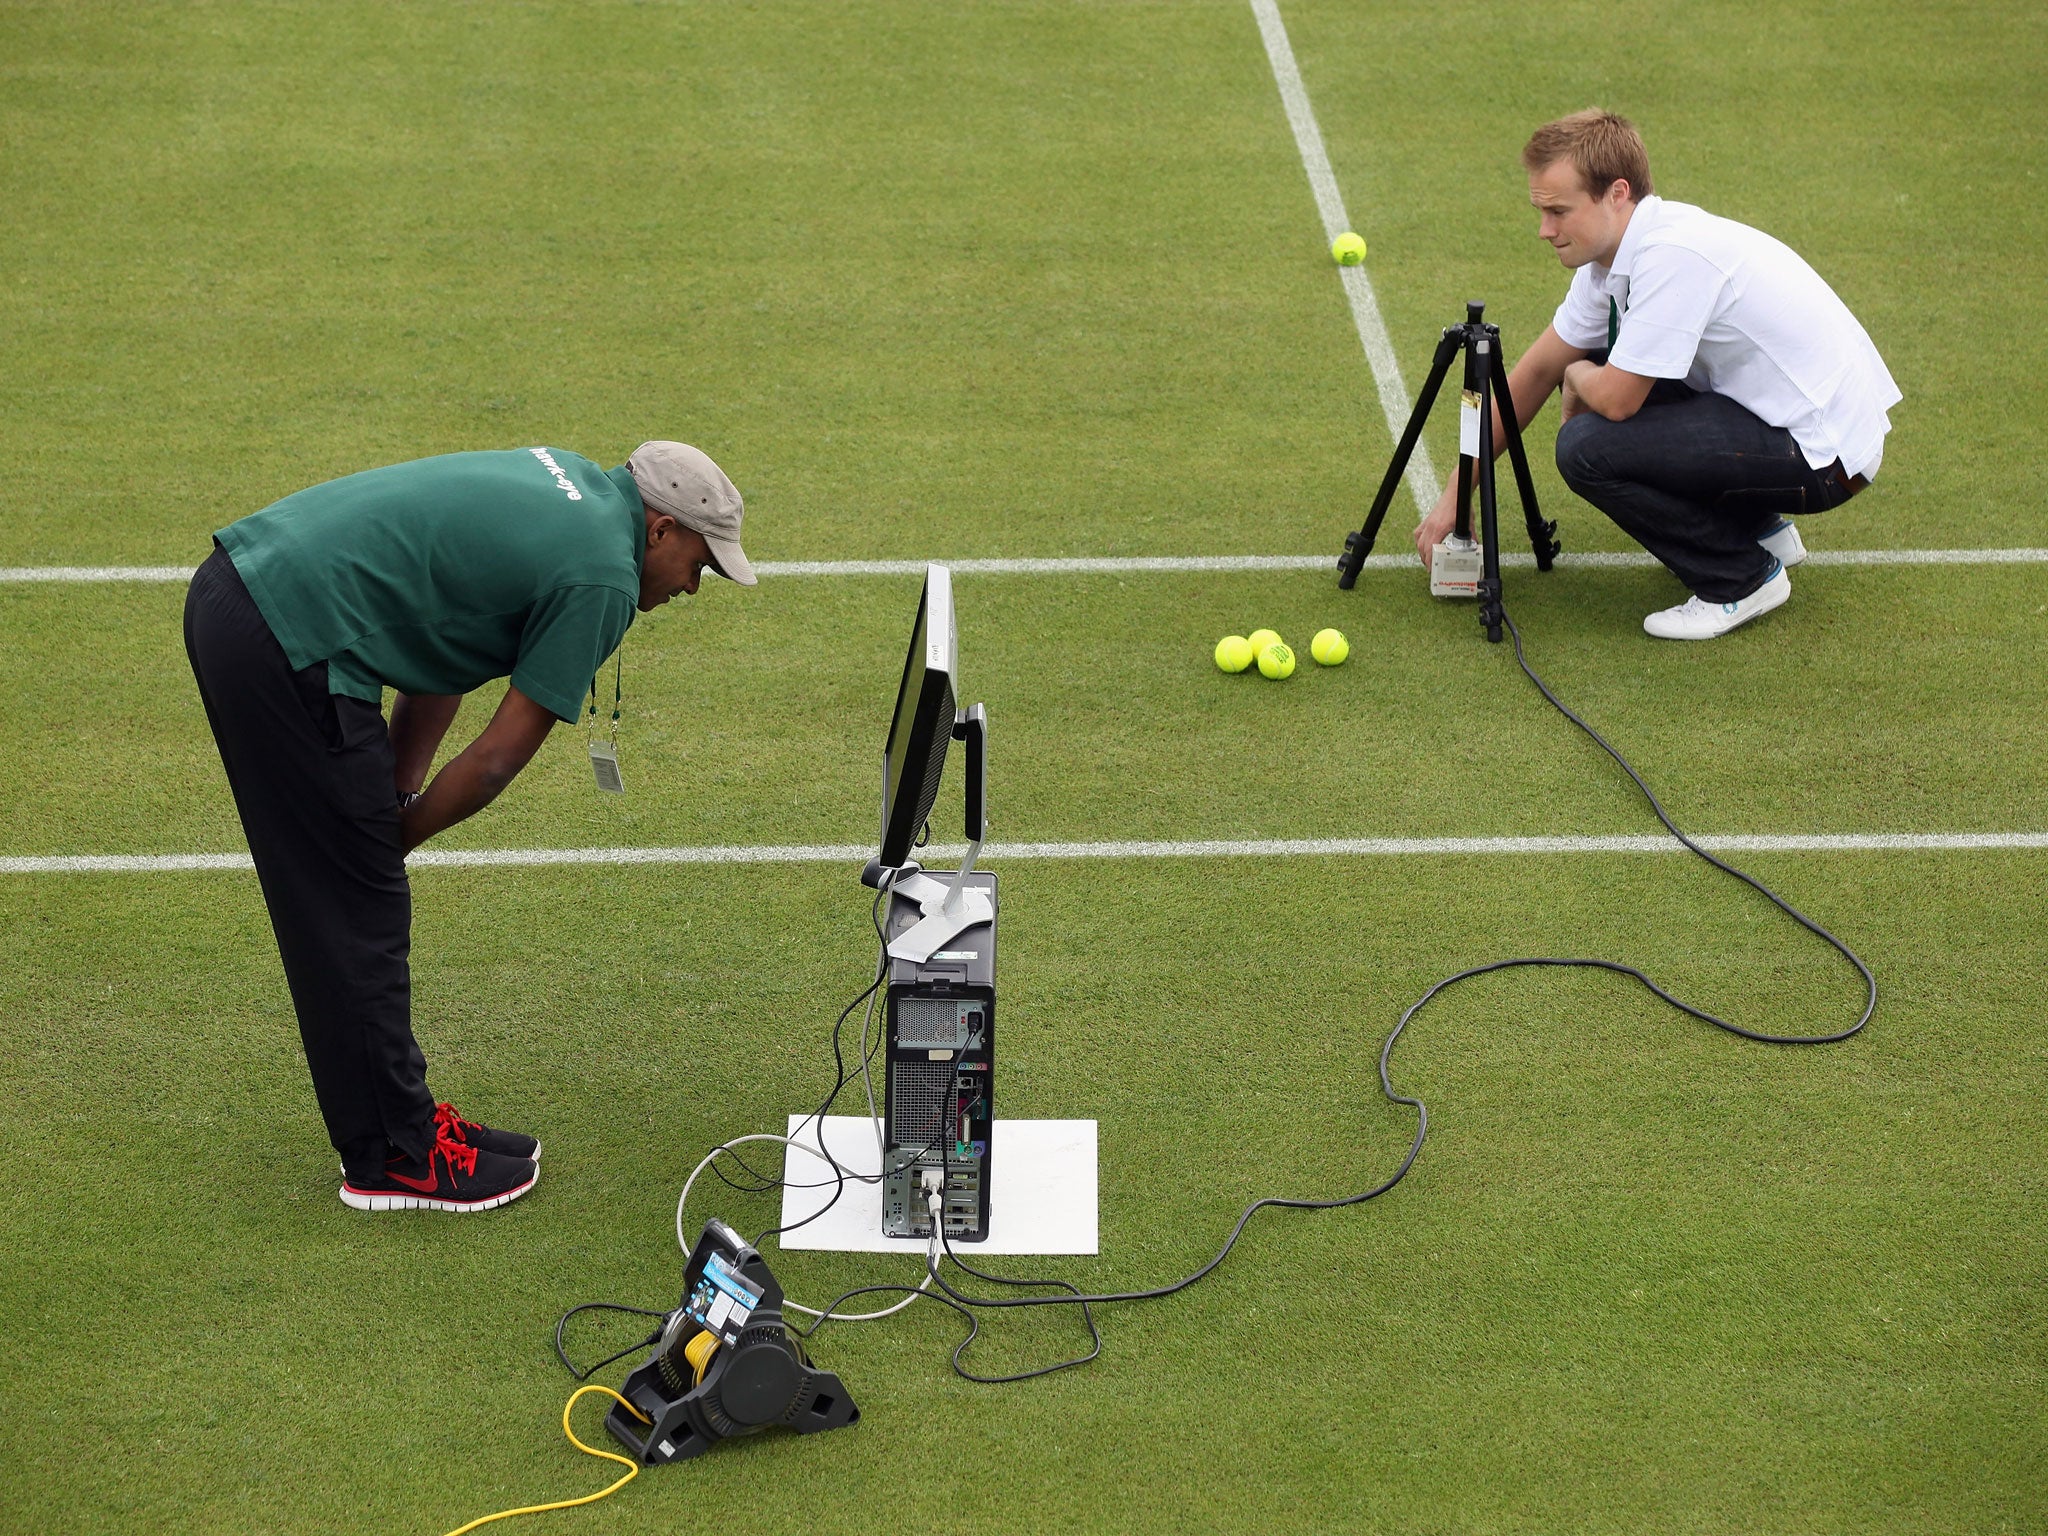 Hawk-Eye is also trialling robotic cameras that track players’ every move on Wimbledon’s outer courts. The data can tell them things such as how far they ran and where they spent the most time around the court